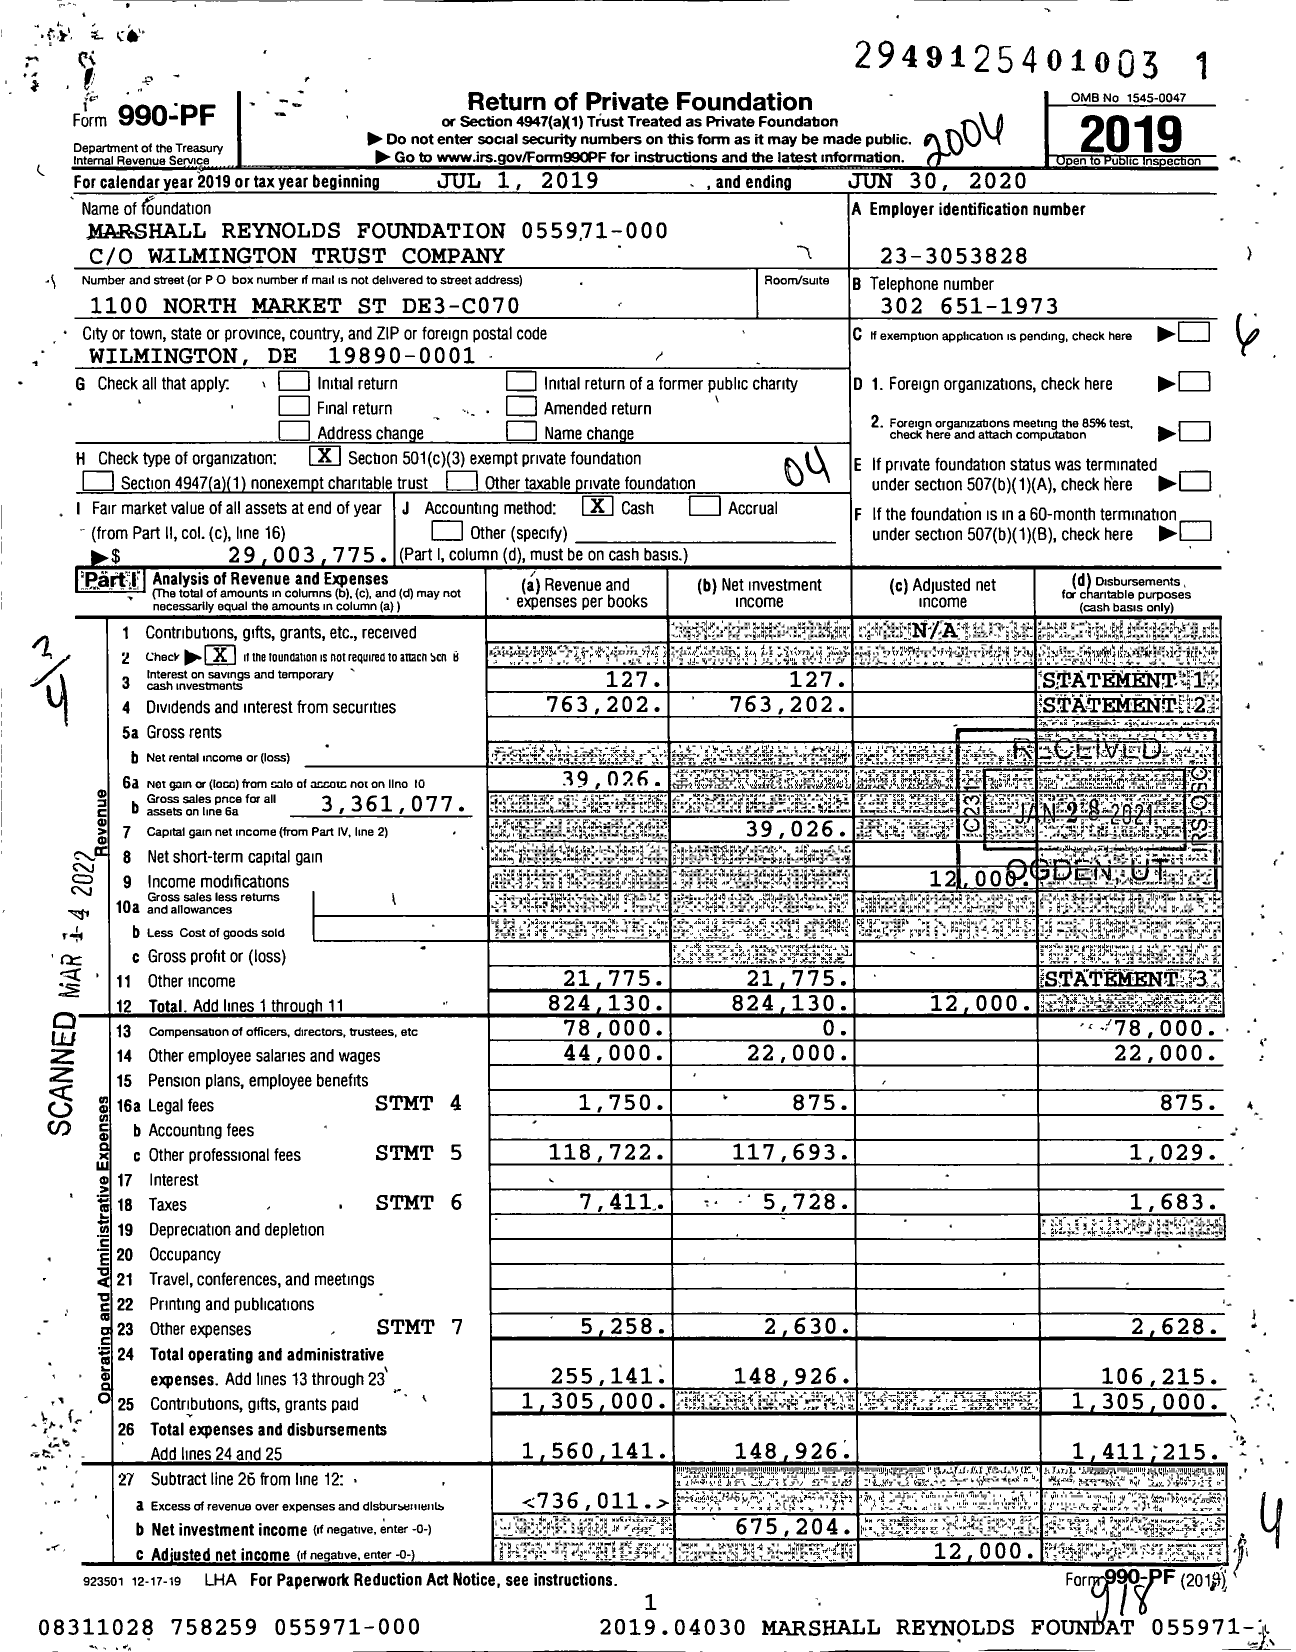 Image of first page of 2019 Form 990PF for Marshall Reynolds Foundation 055971-000